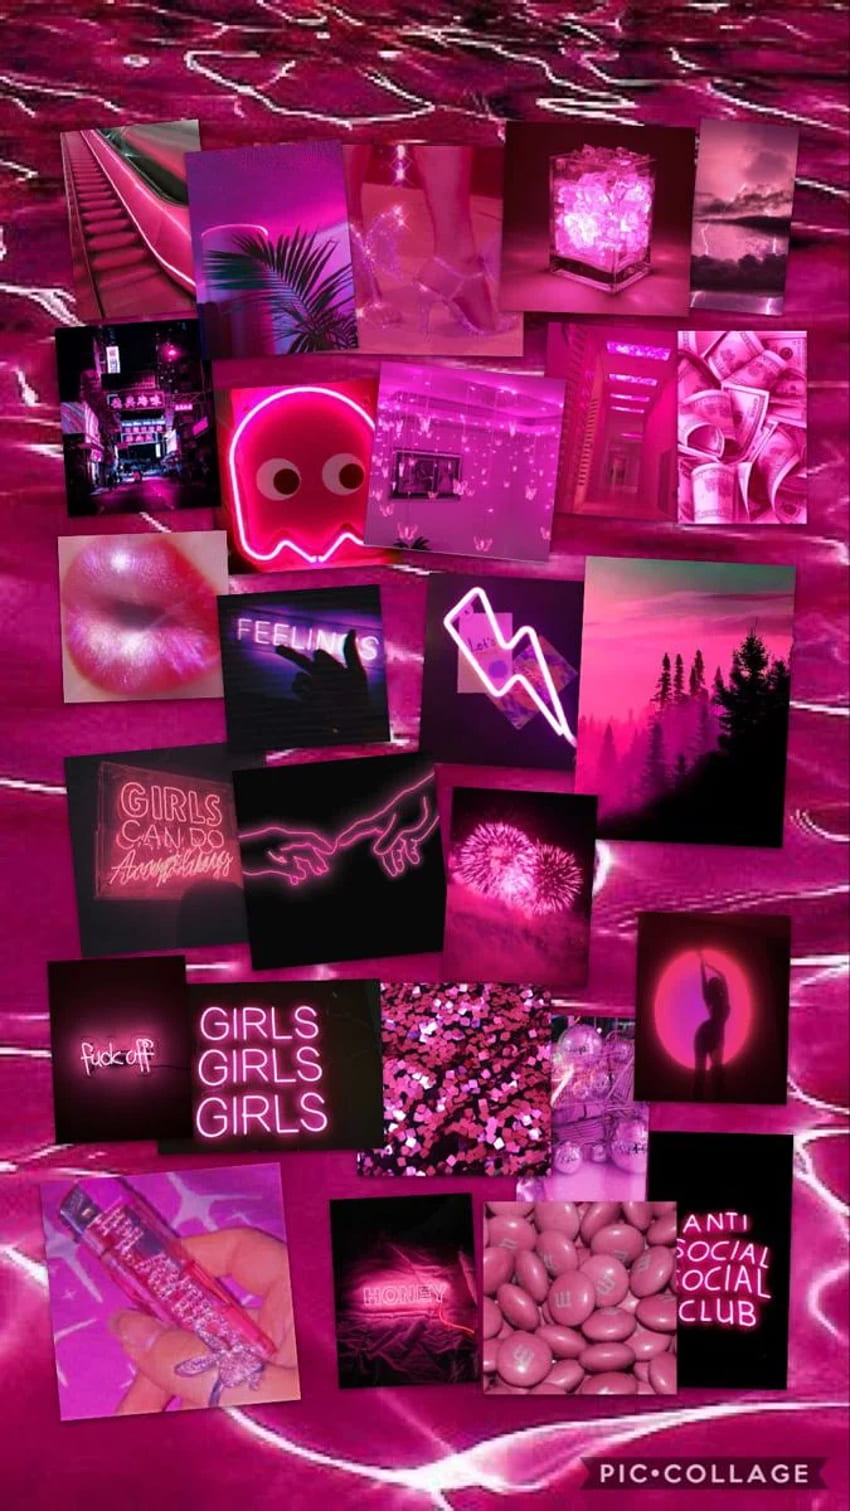 Cyberpunk Bad Girl Live Wallpaper with Neon Cityscape - free download